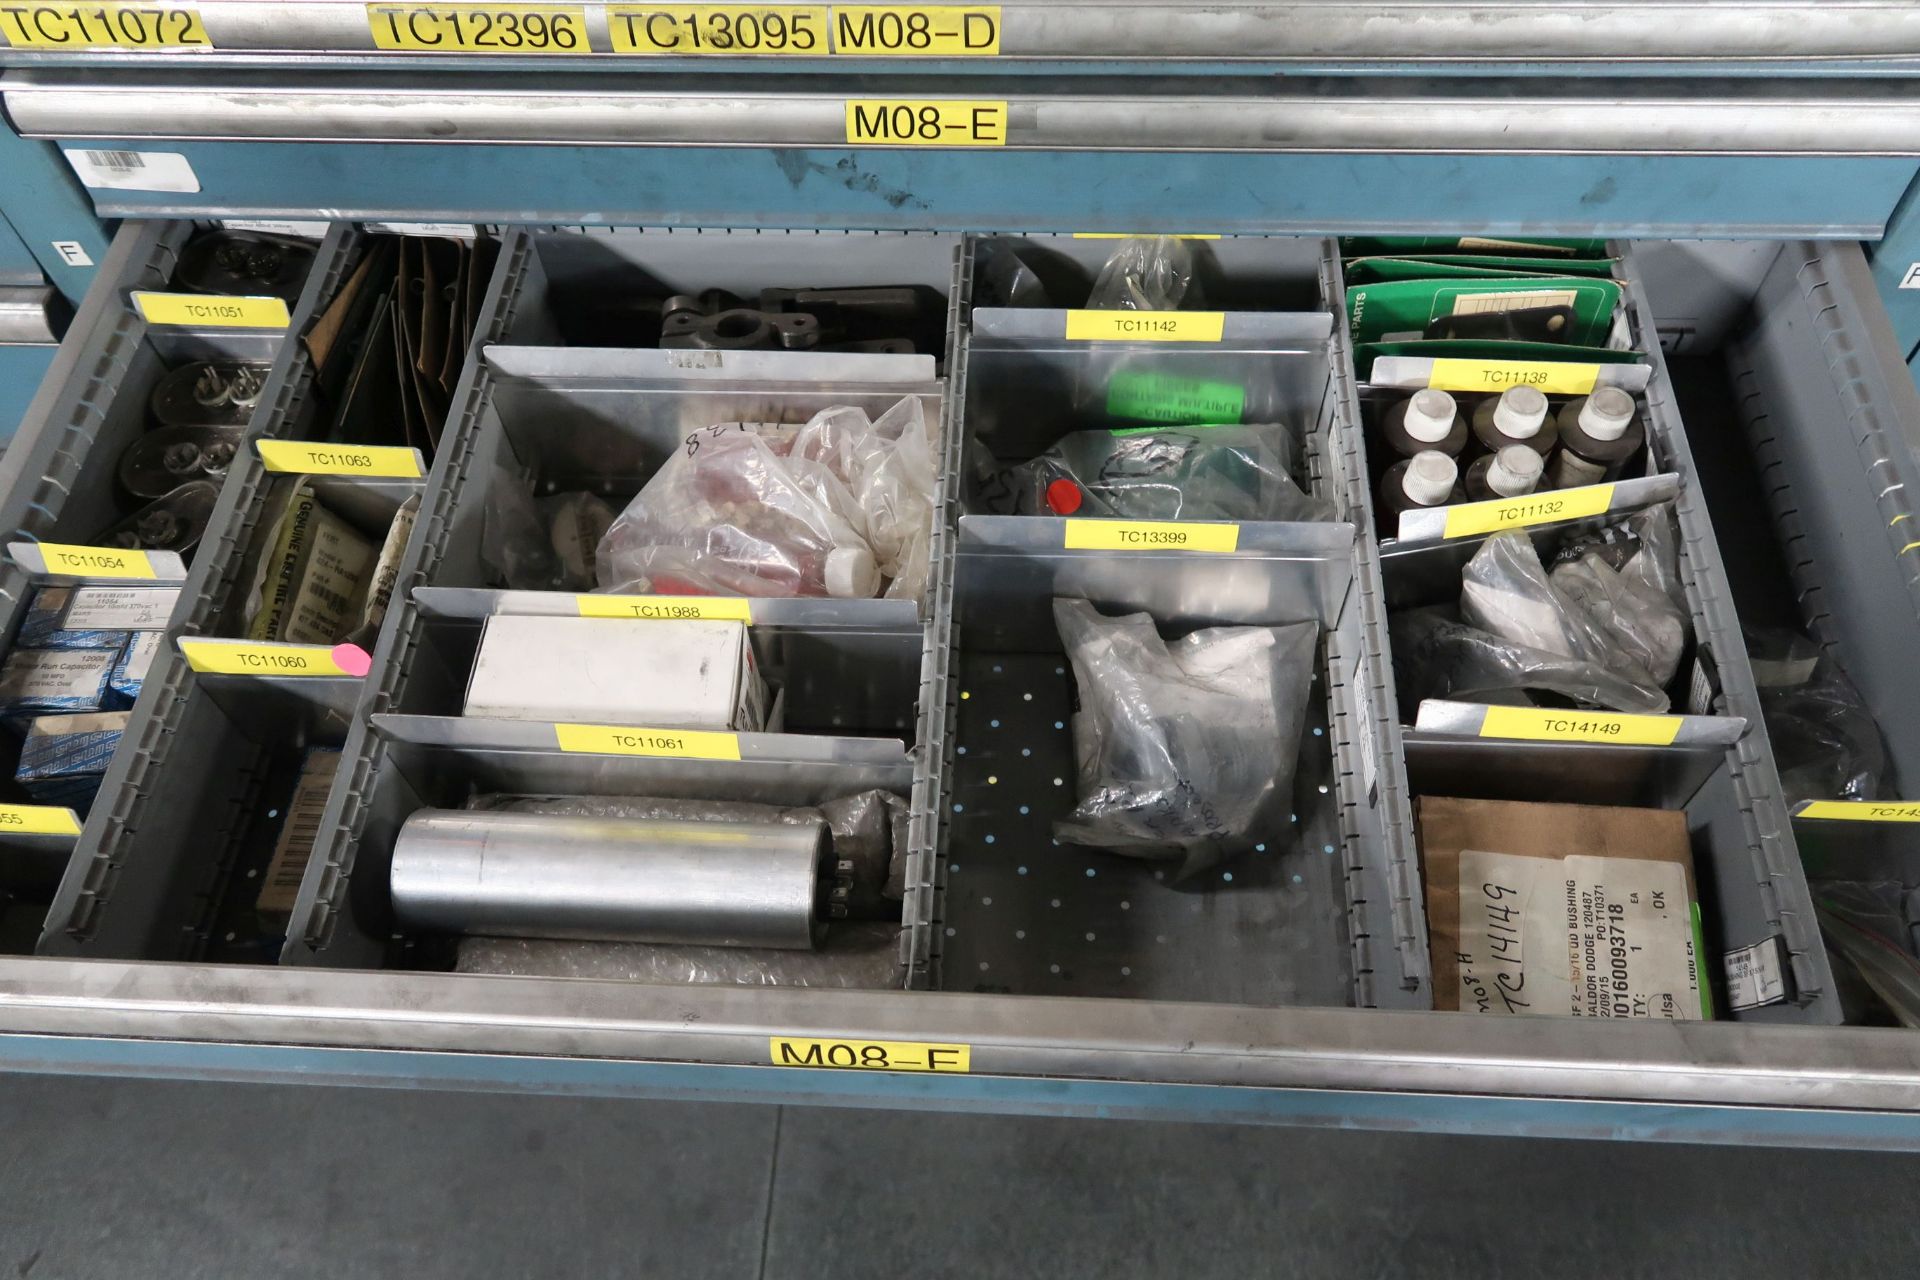 TOOLING CABINETS WITH CONTENTS - MOSTLY MACHINE PARTS **LOADING PRICE DUE TO ERRA - $2,000.00** - Image 48 of 59